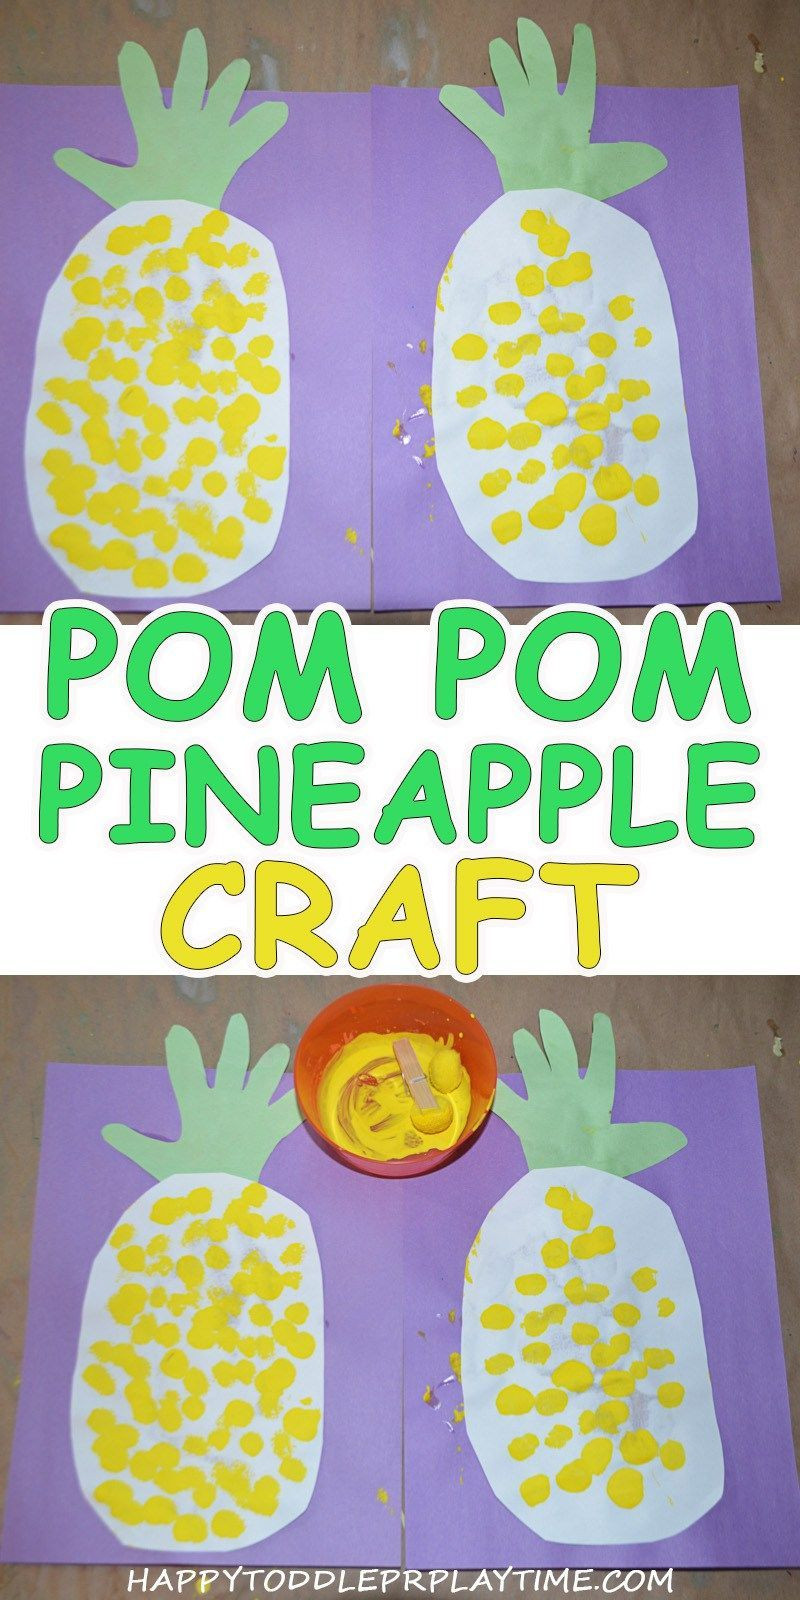 Arts &amp; Crafts For Toddlers
 Pom Pom Painted Pineapple Craft